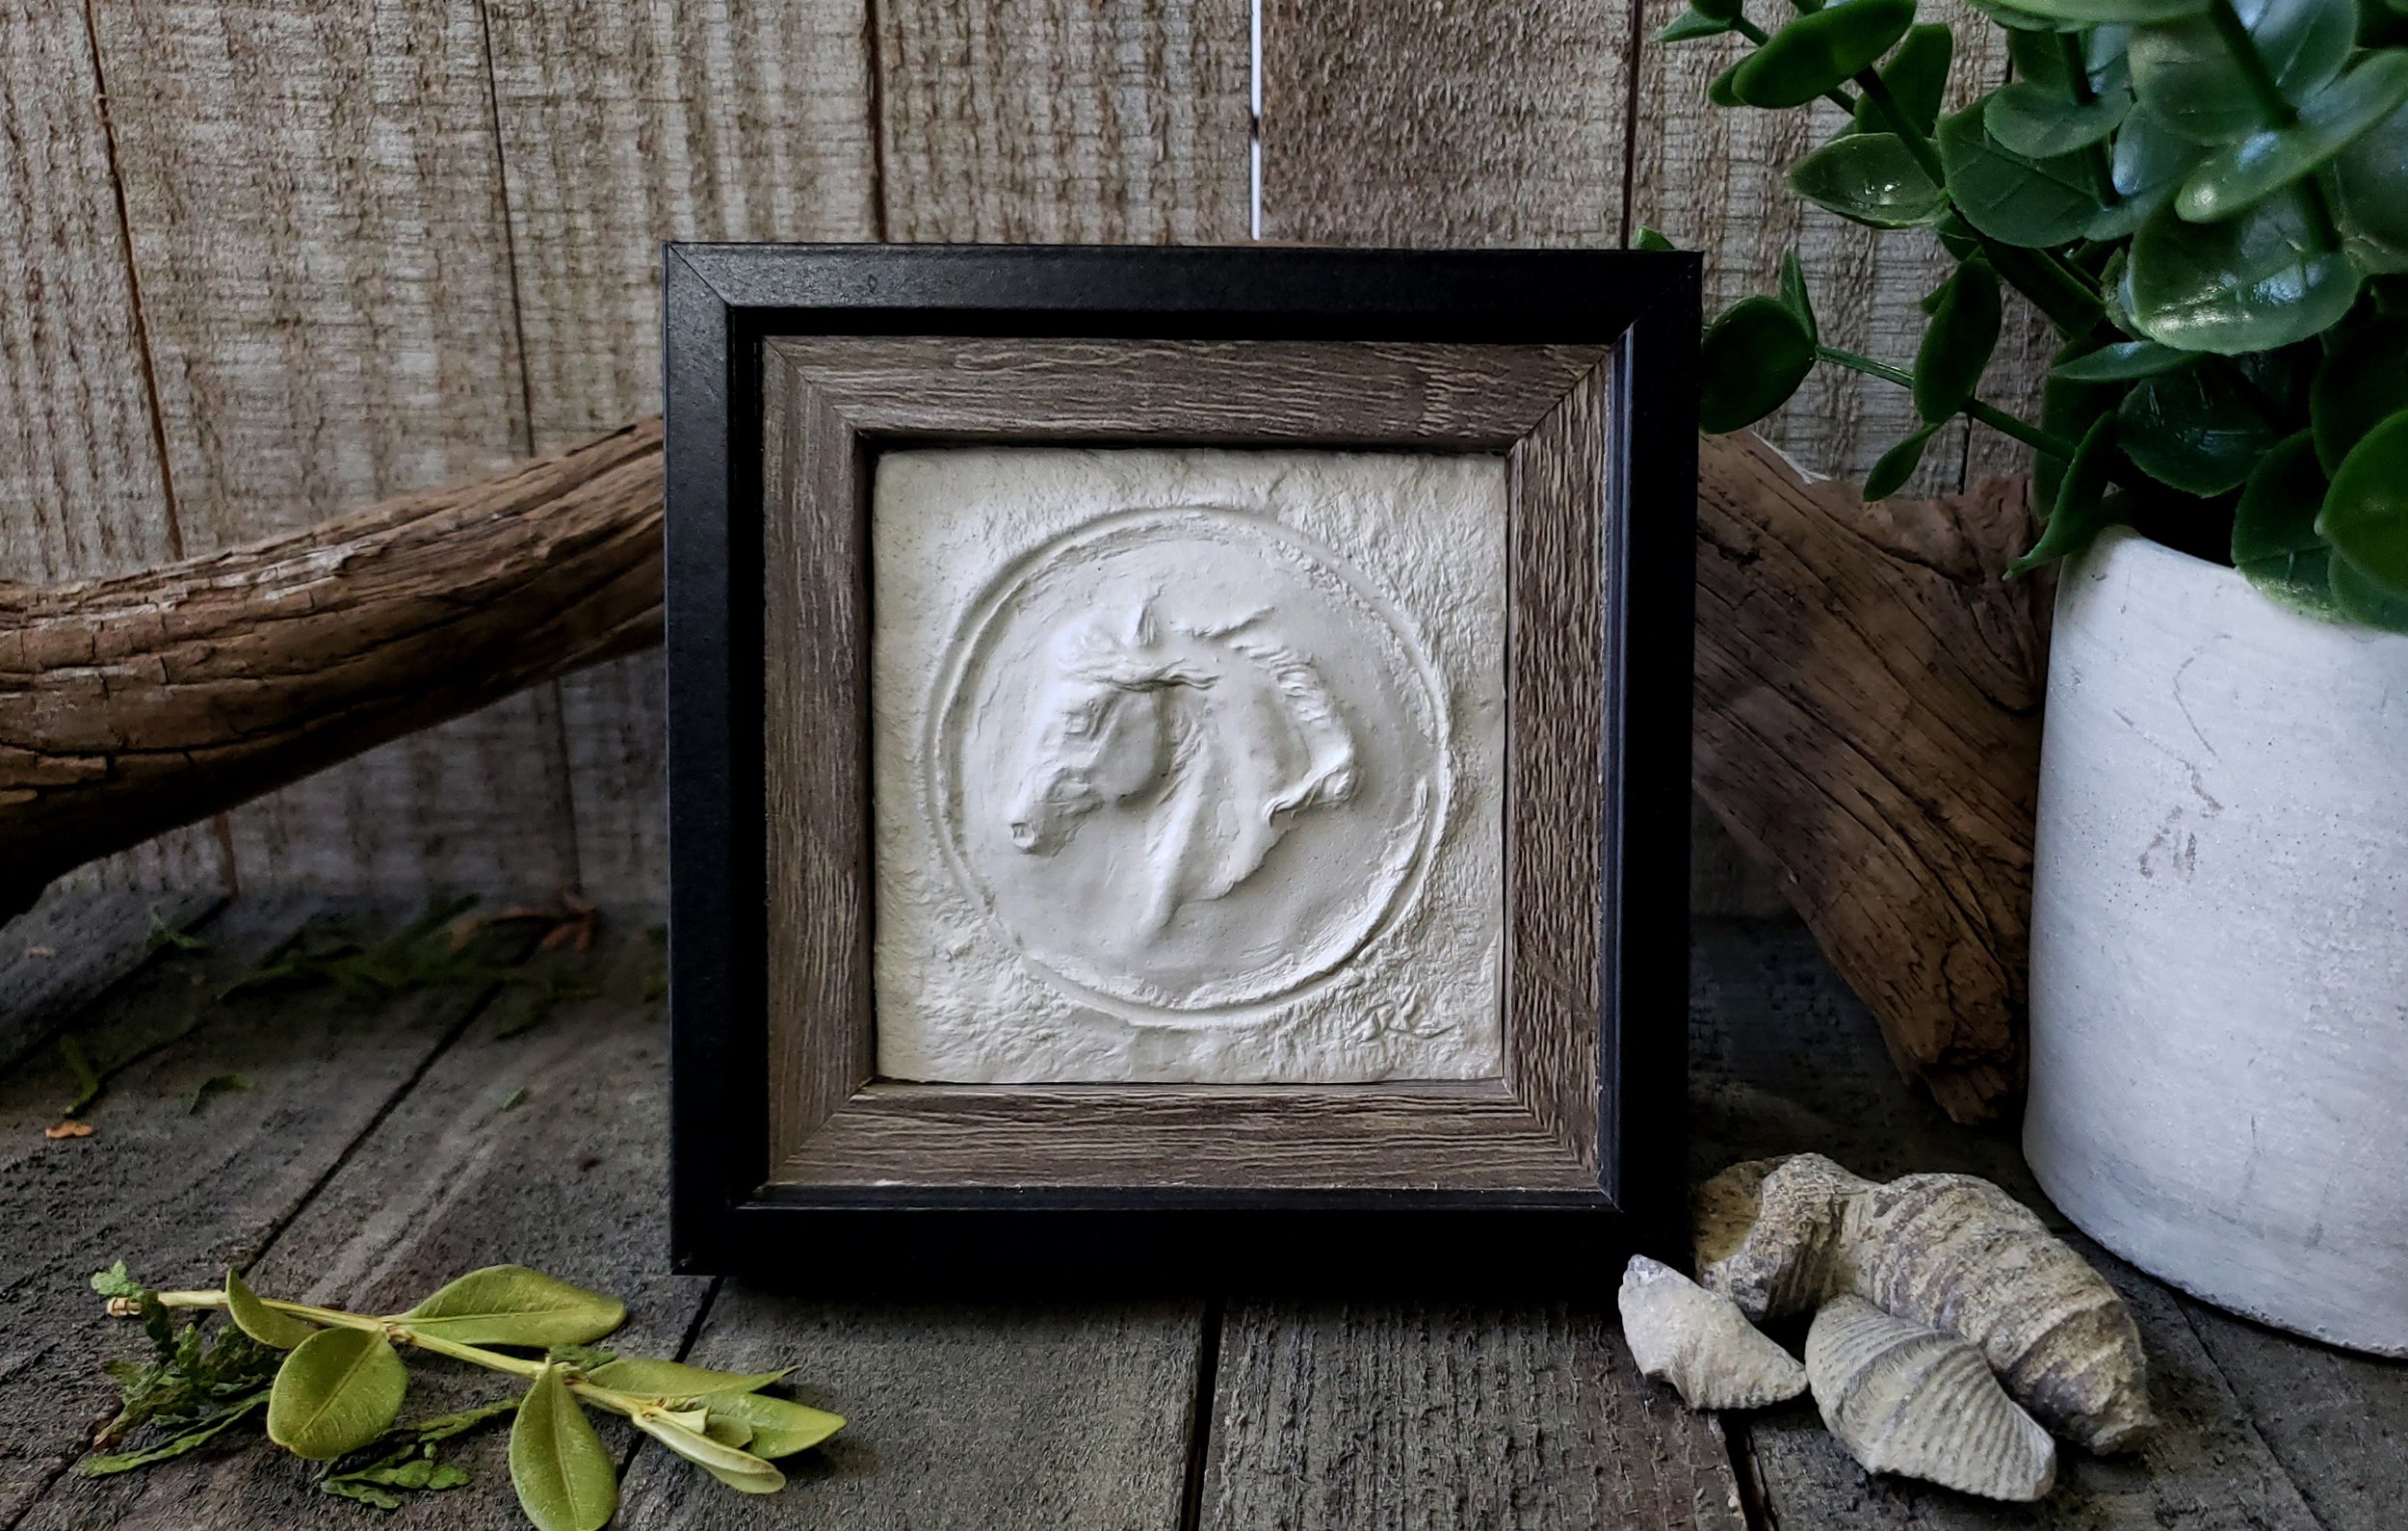 sculpture small 4x4 white horse framed in black sitting on wood background with plant beside.jpg